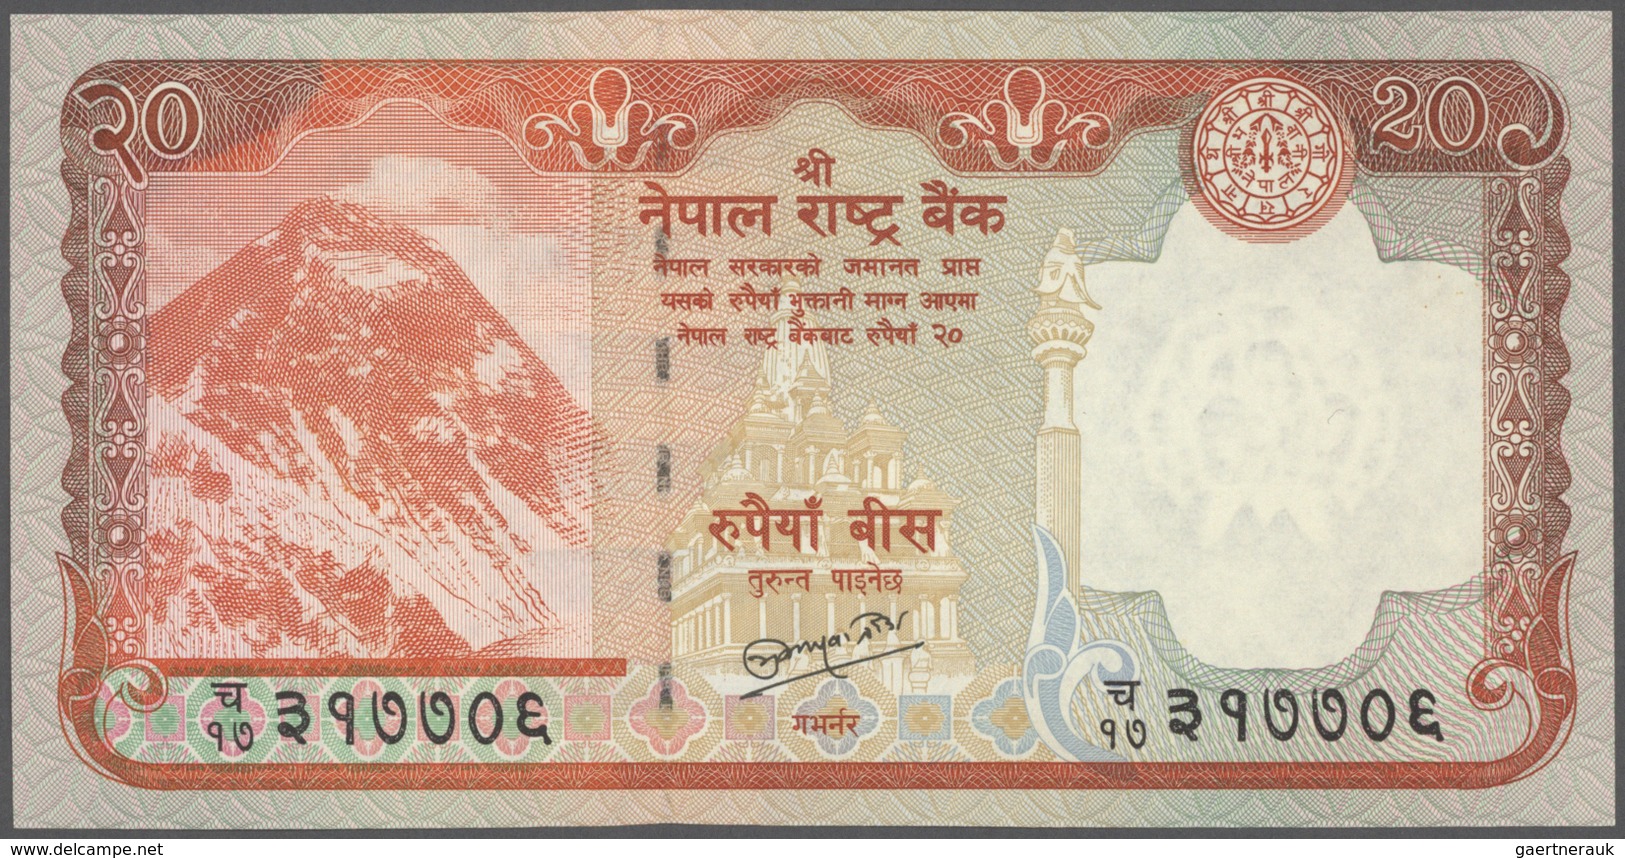 Nepal: set of 26 notes containing the following Pick numbers P. 1, 5, 8, 9, 10, 15, 16, 22, 23, 24,